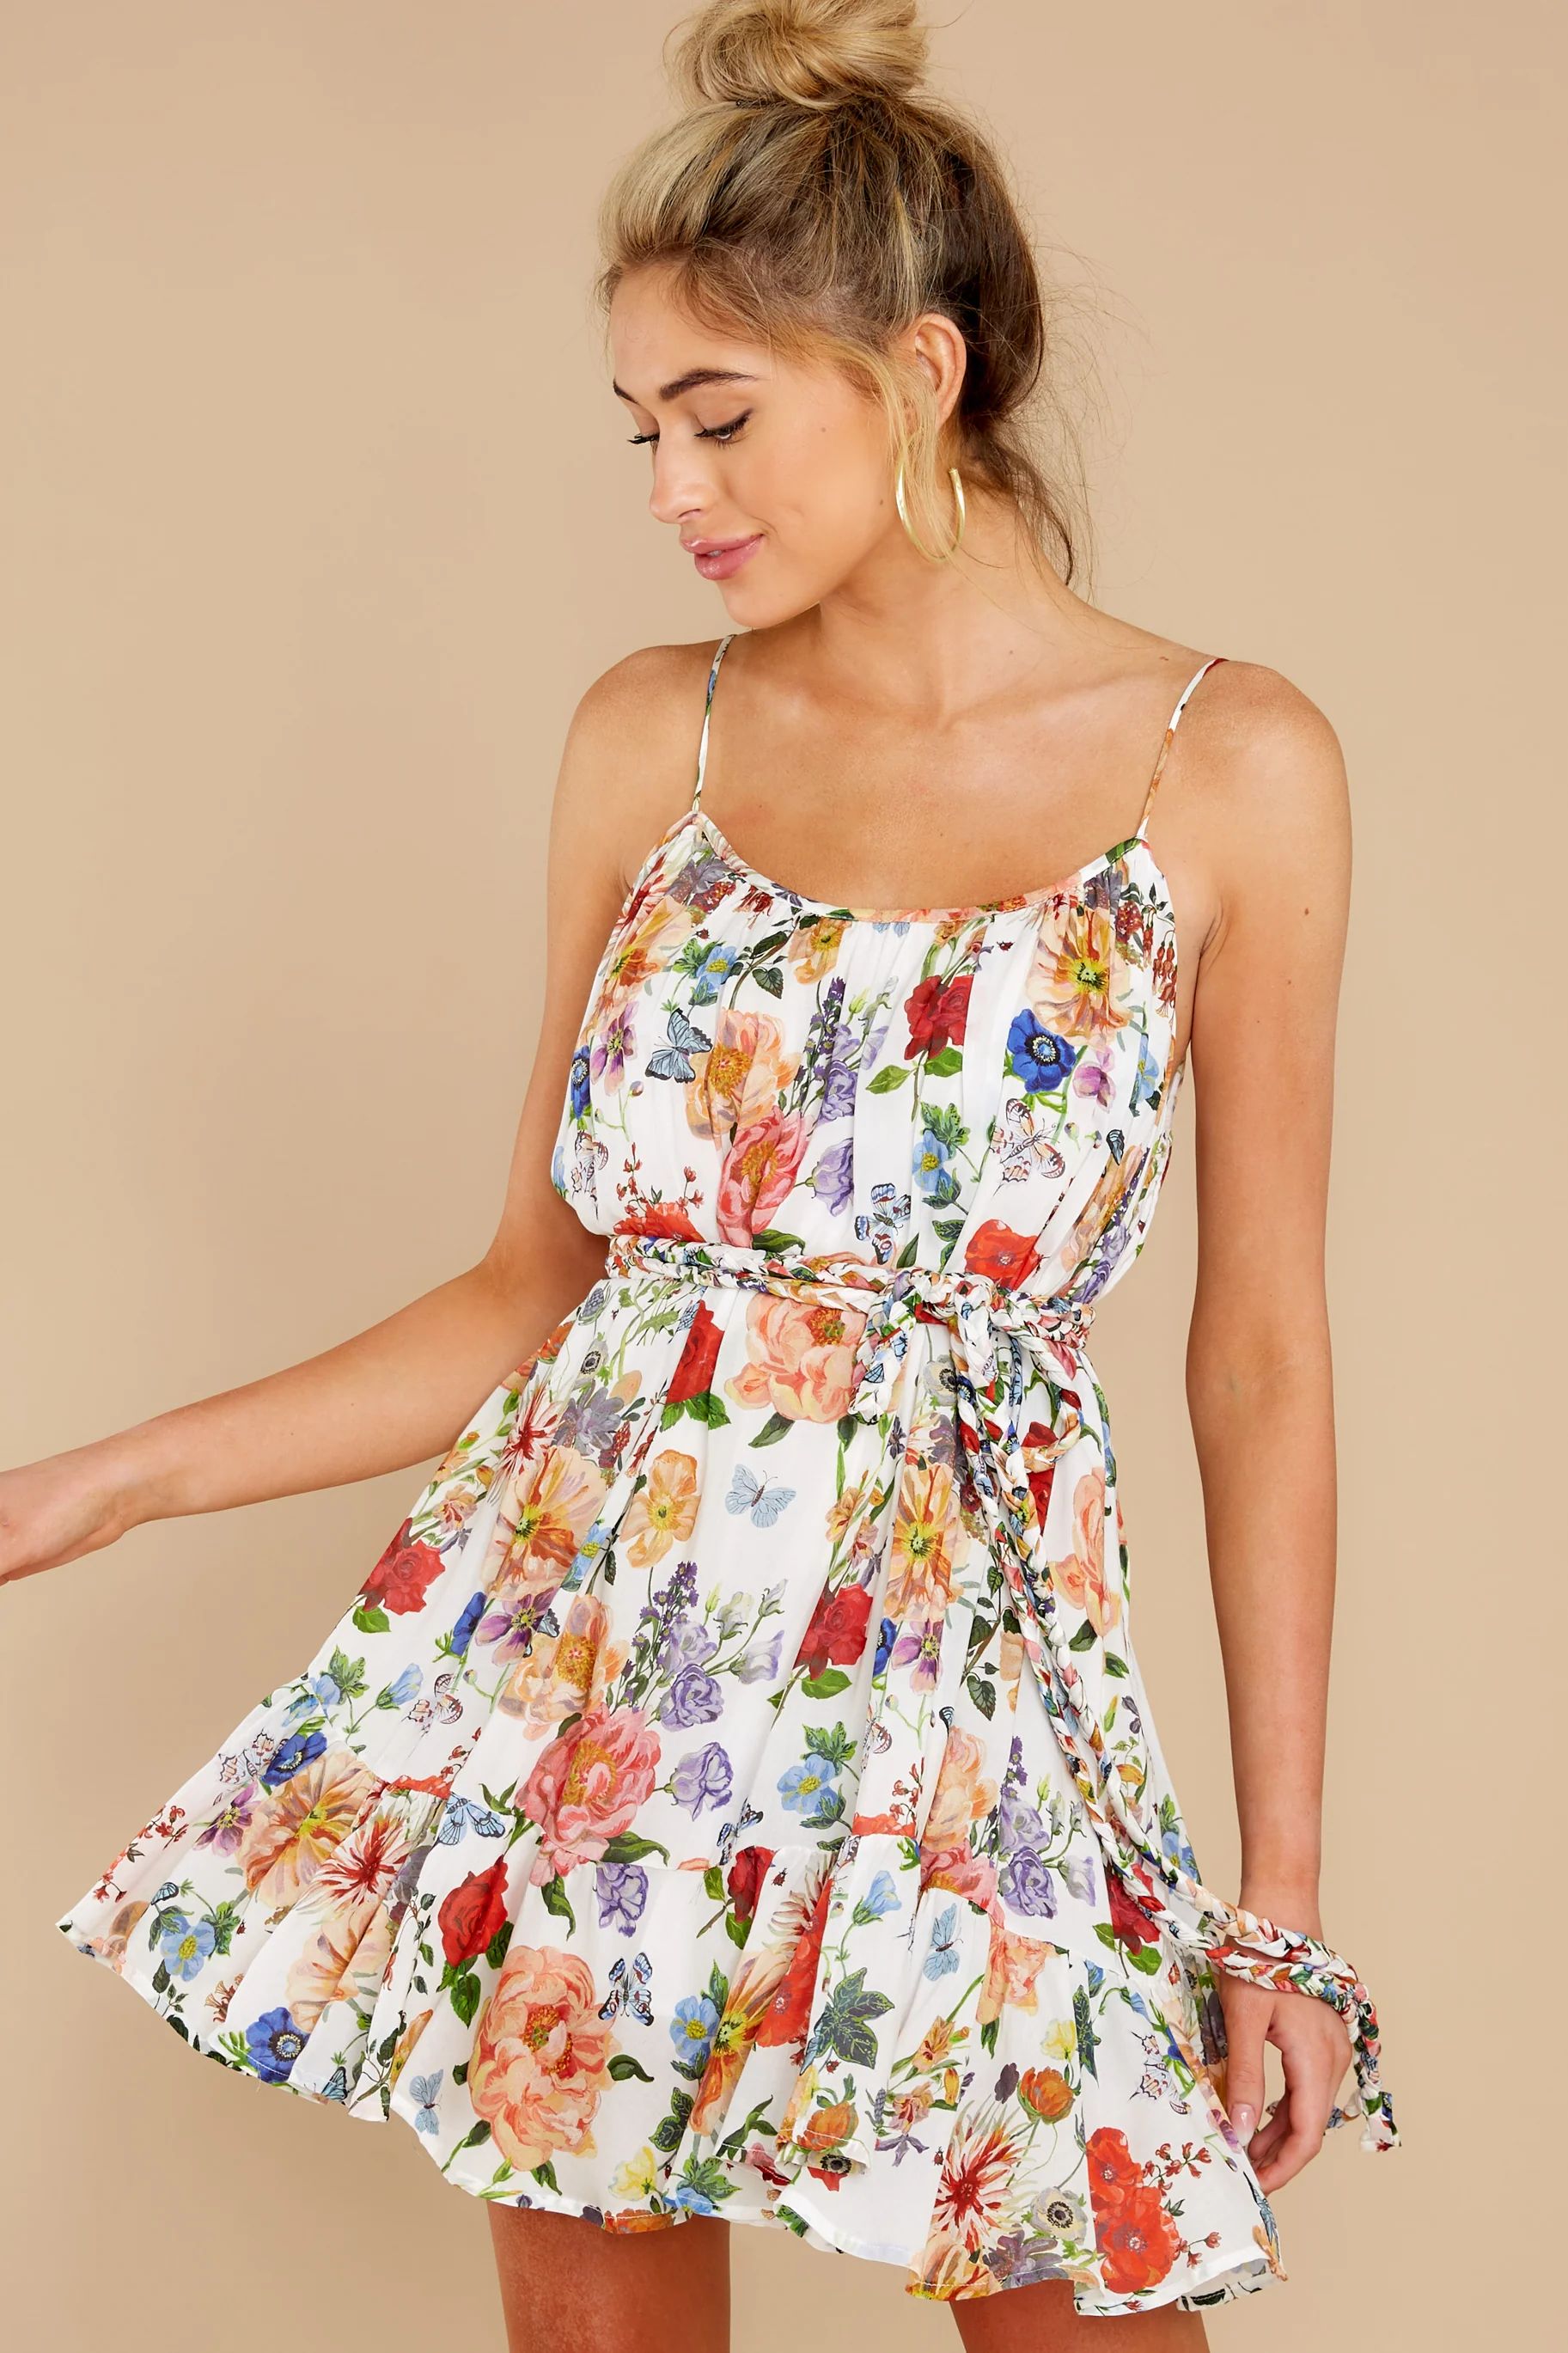 Afternoon Glow White Multi Floral Print Dress | Red Dress 